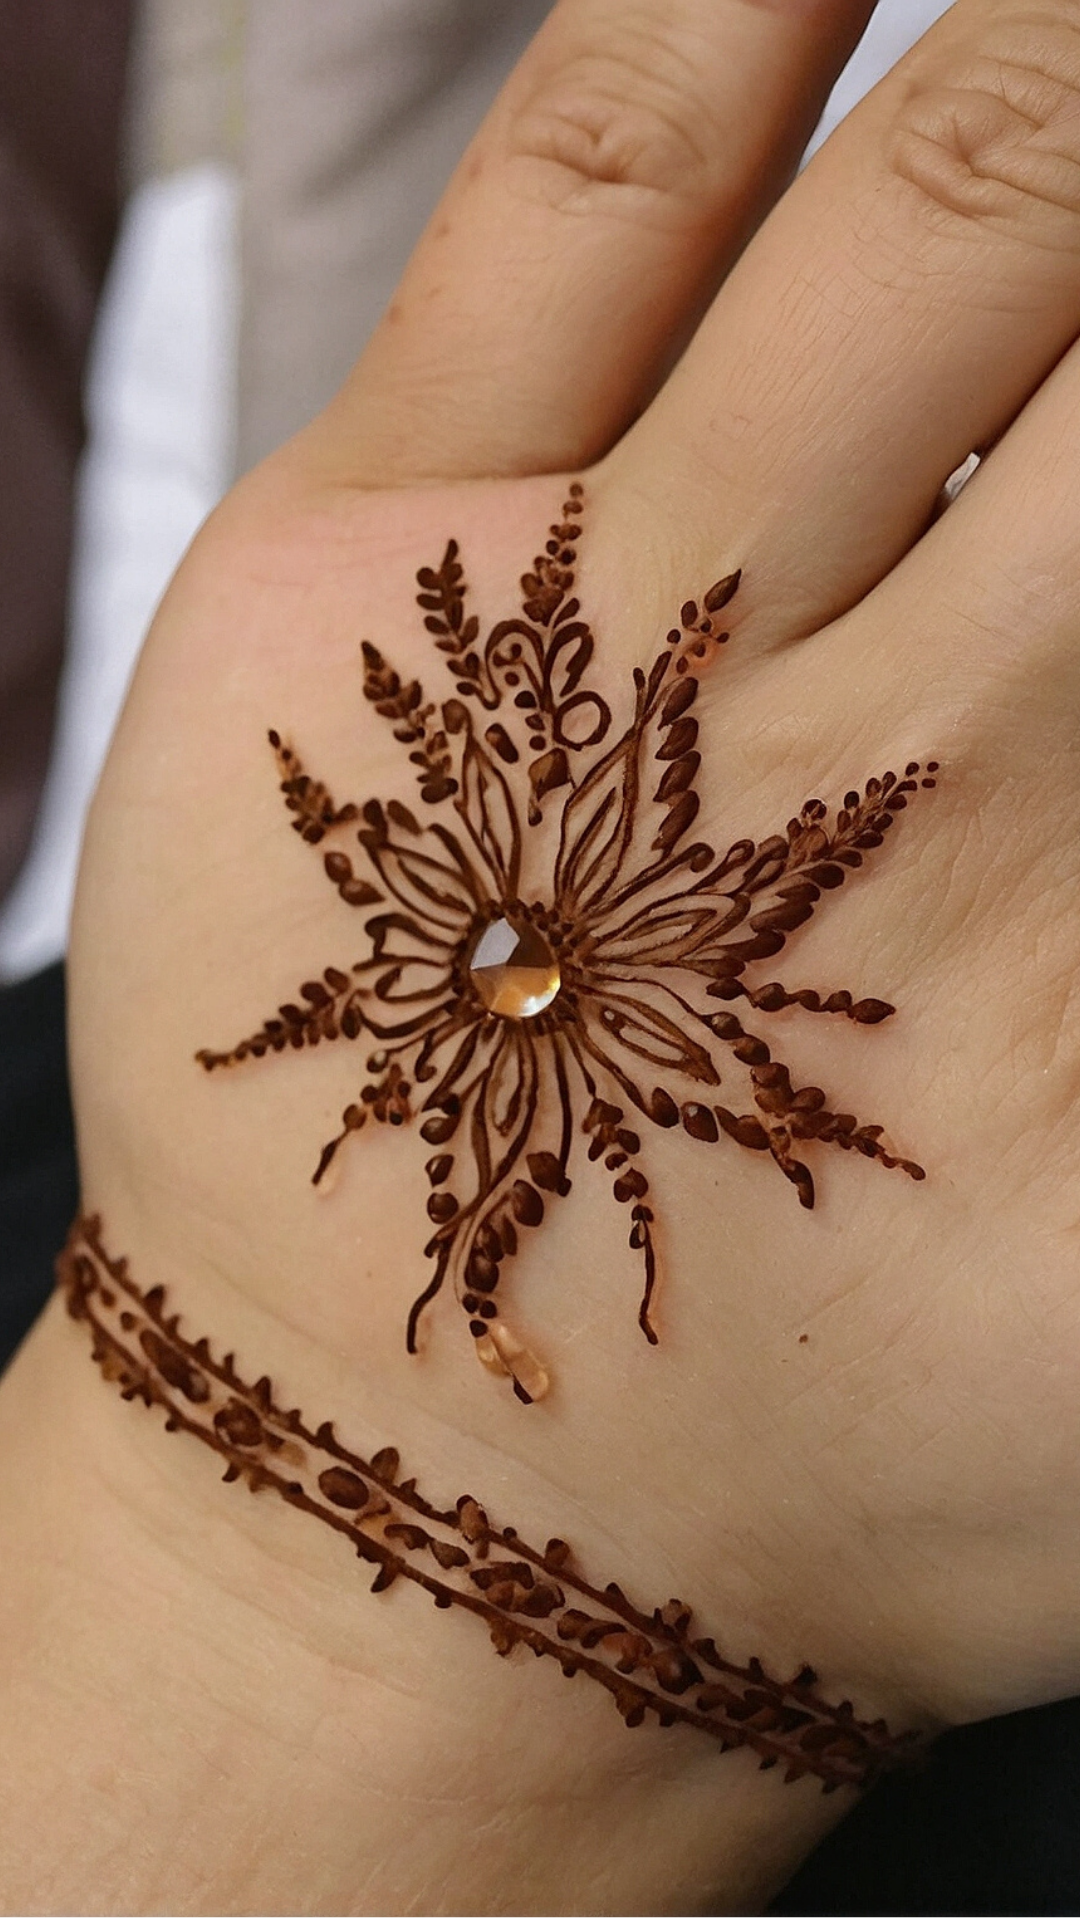 Sun-kissed Skin and Henna: Stencils Inspired by the Beach